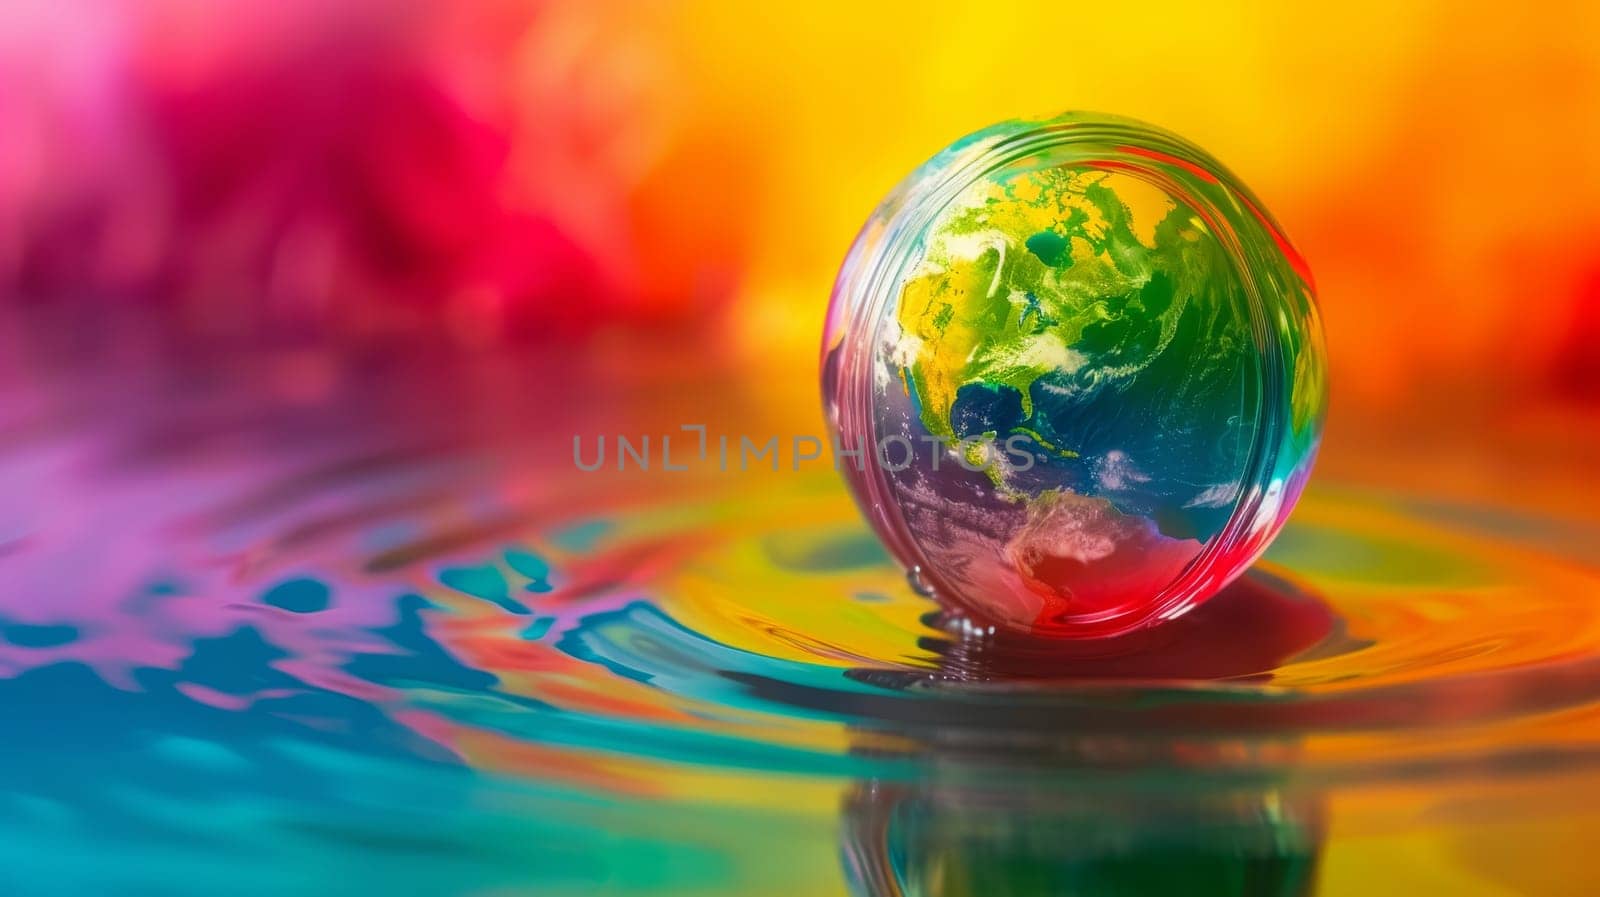 Planet Earth Globe in Water Droplet Reflection with Colorful Background